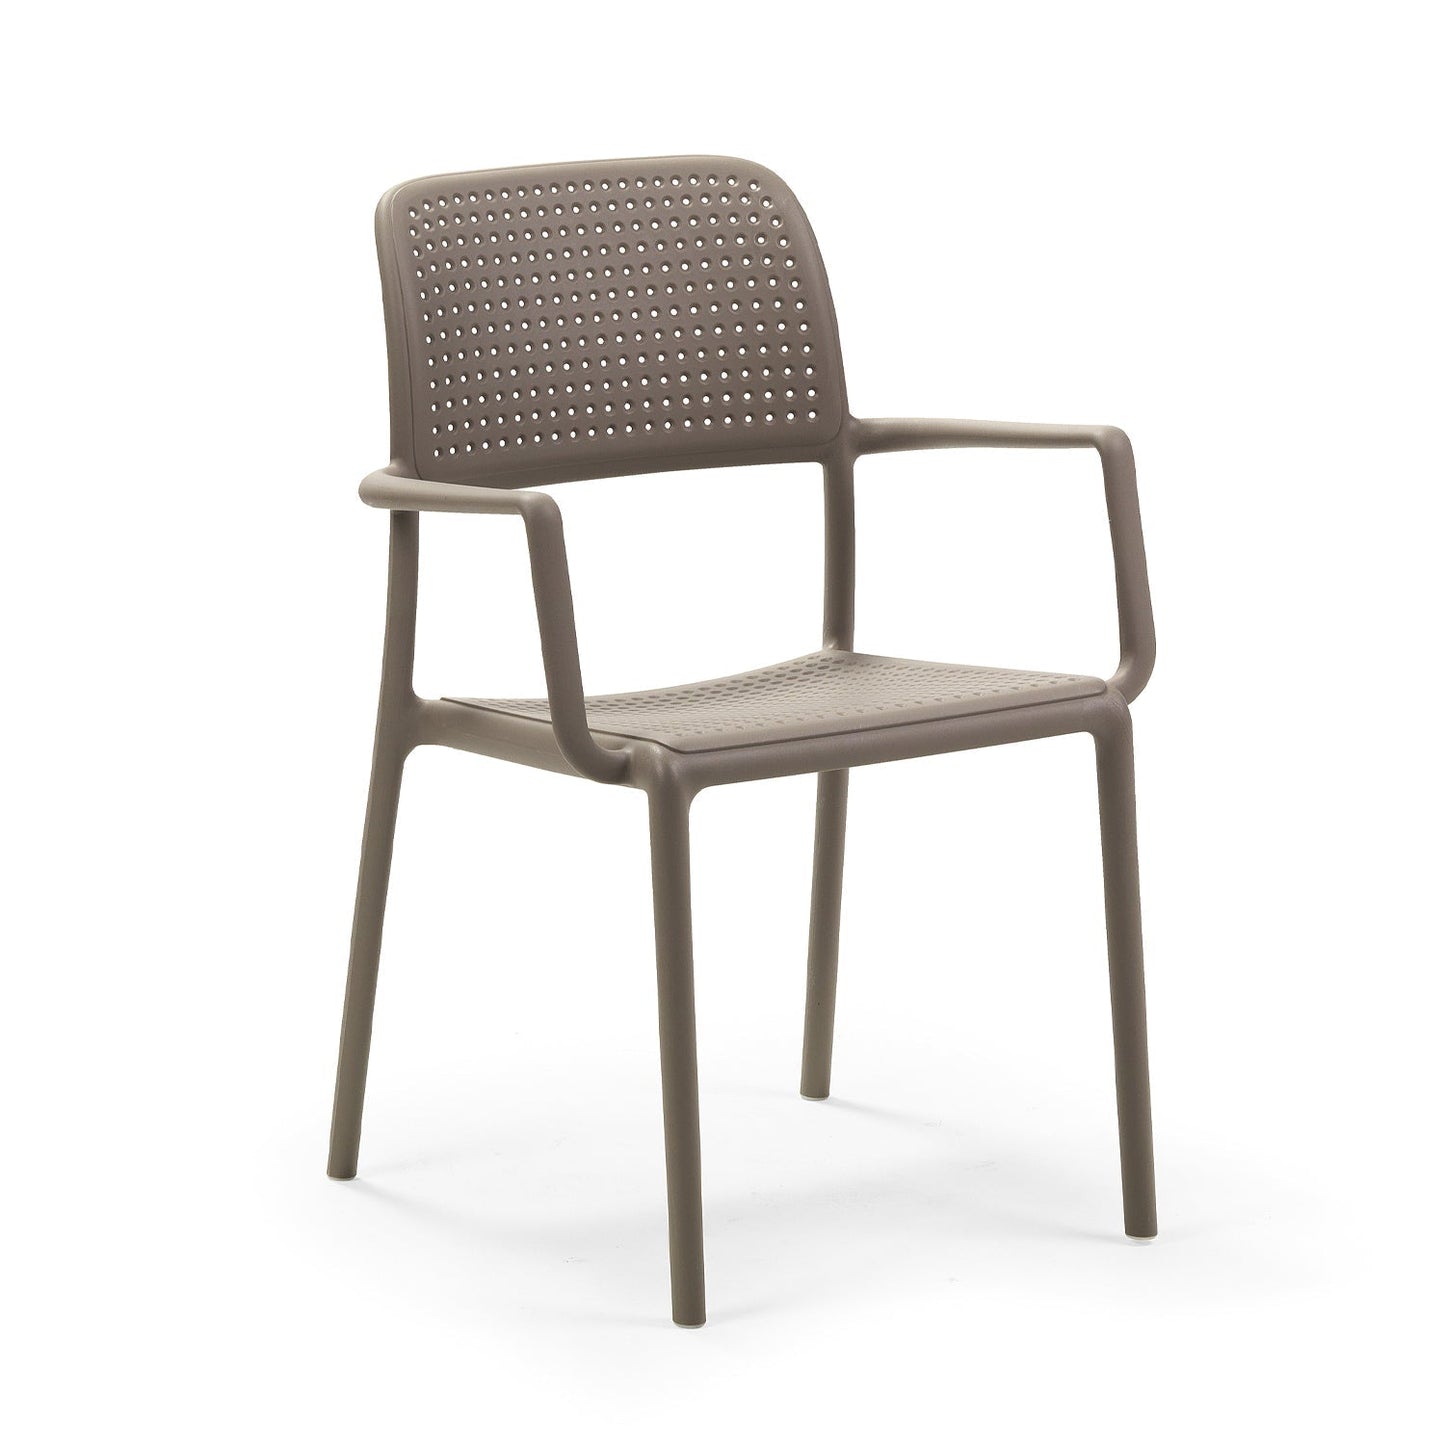 Bora Garden Chair By Nardi In Taupe